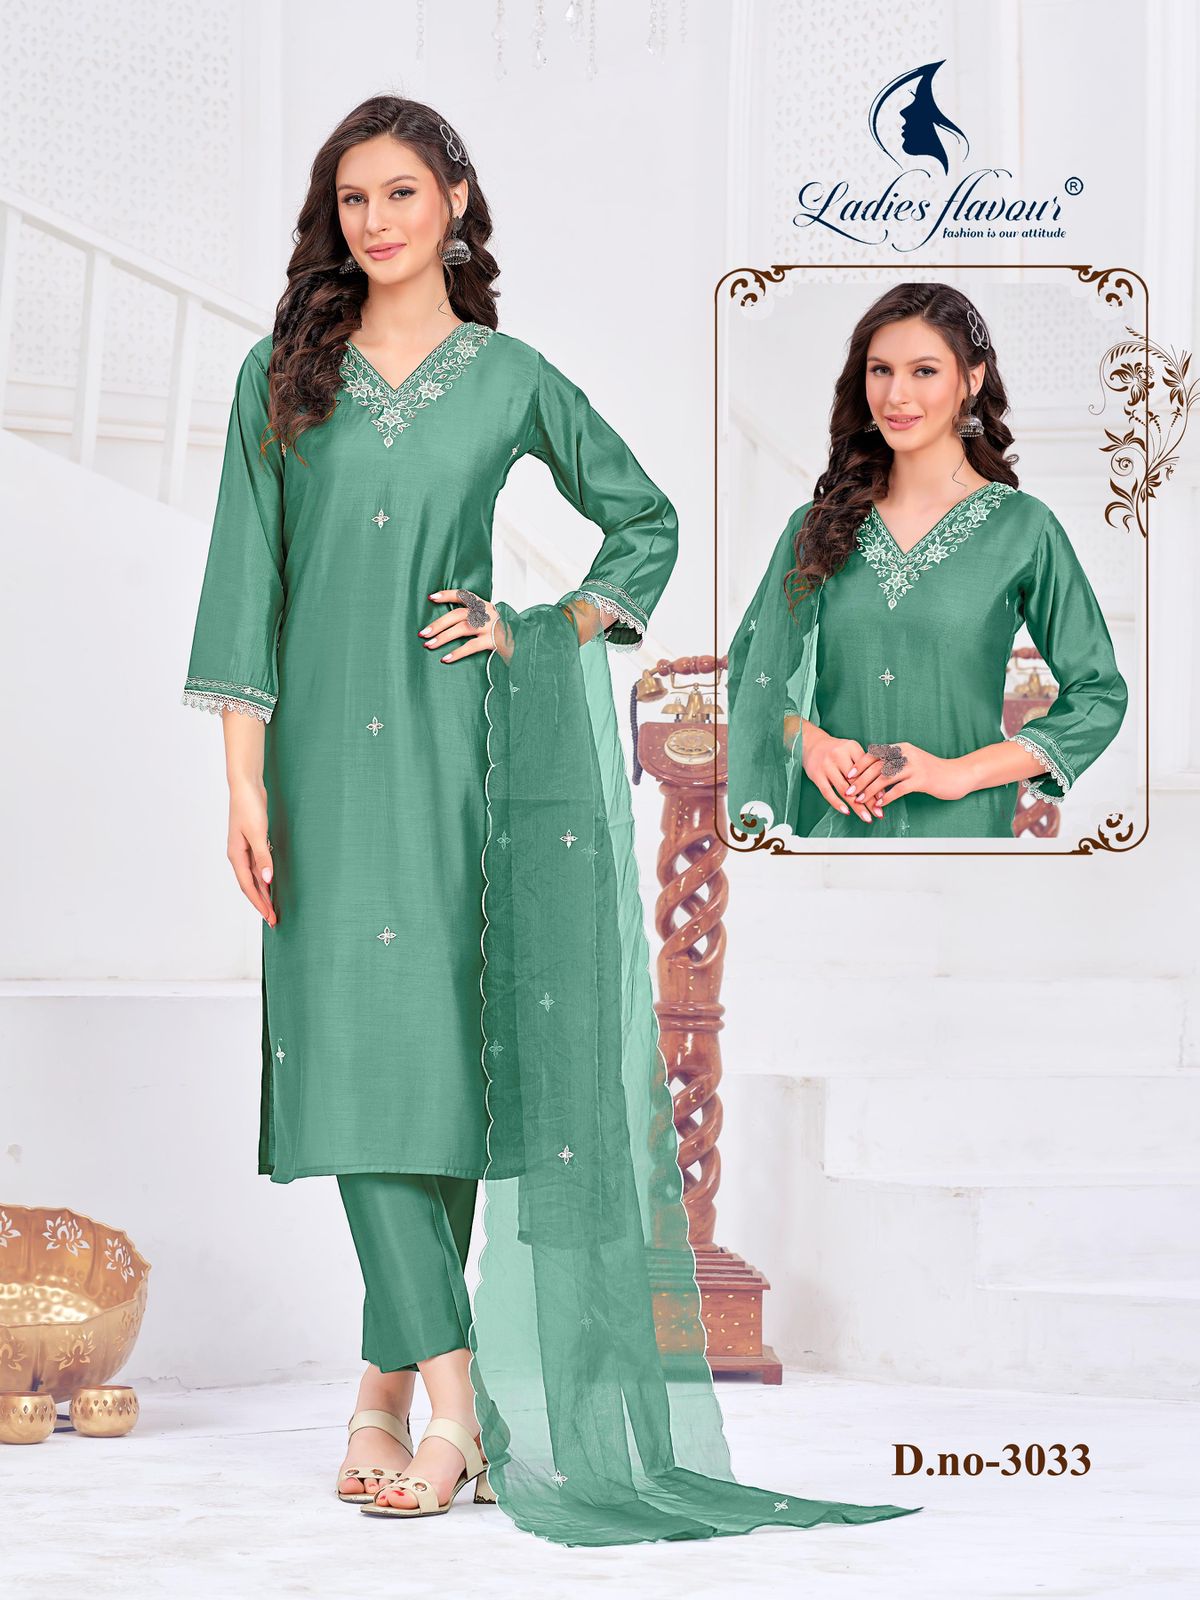 3032-3033 Ladies Flavour Roman Readymade Pant Style Suits